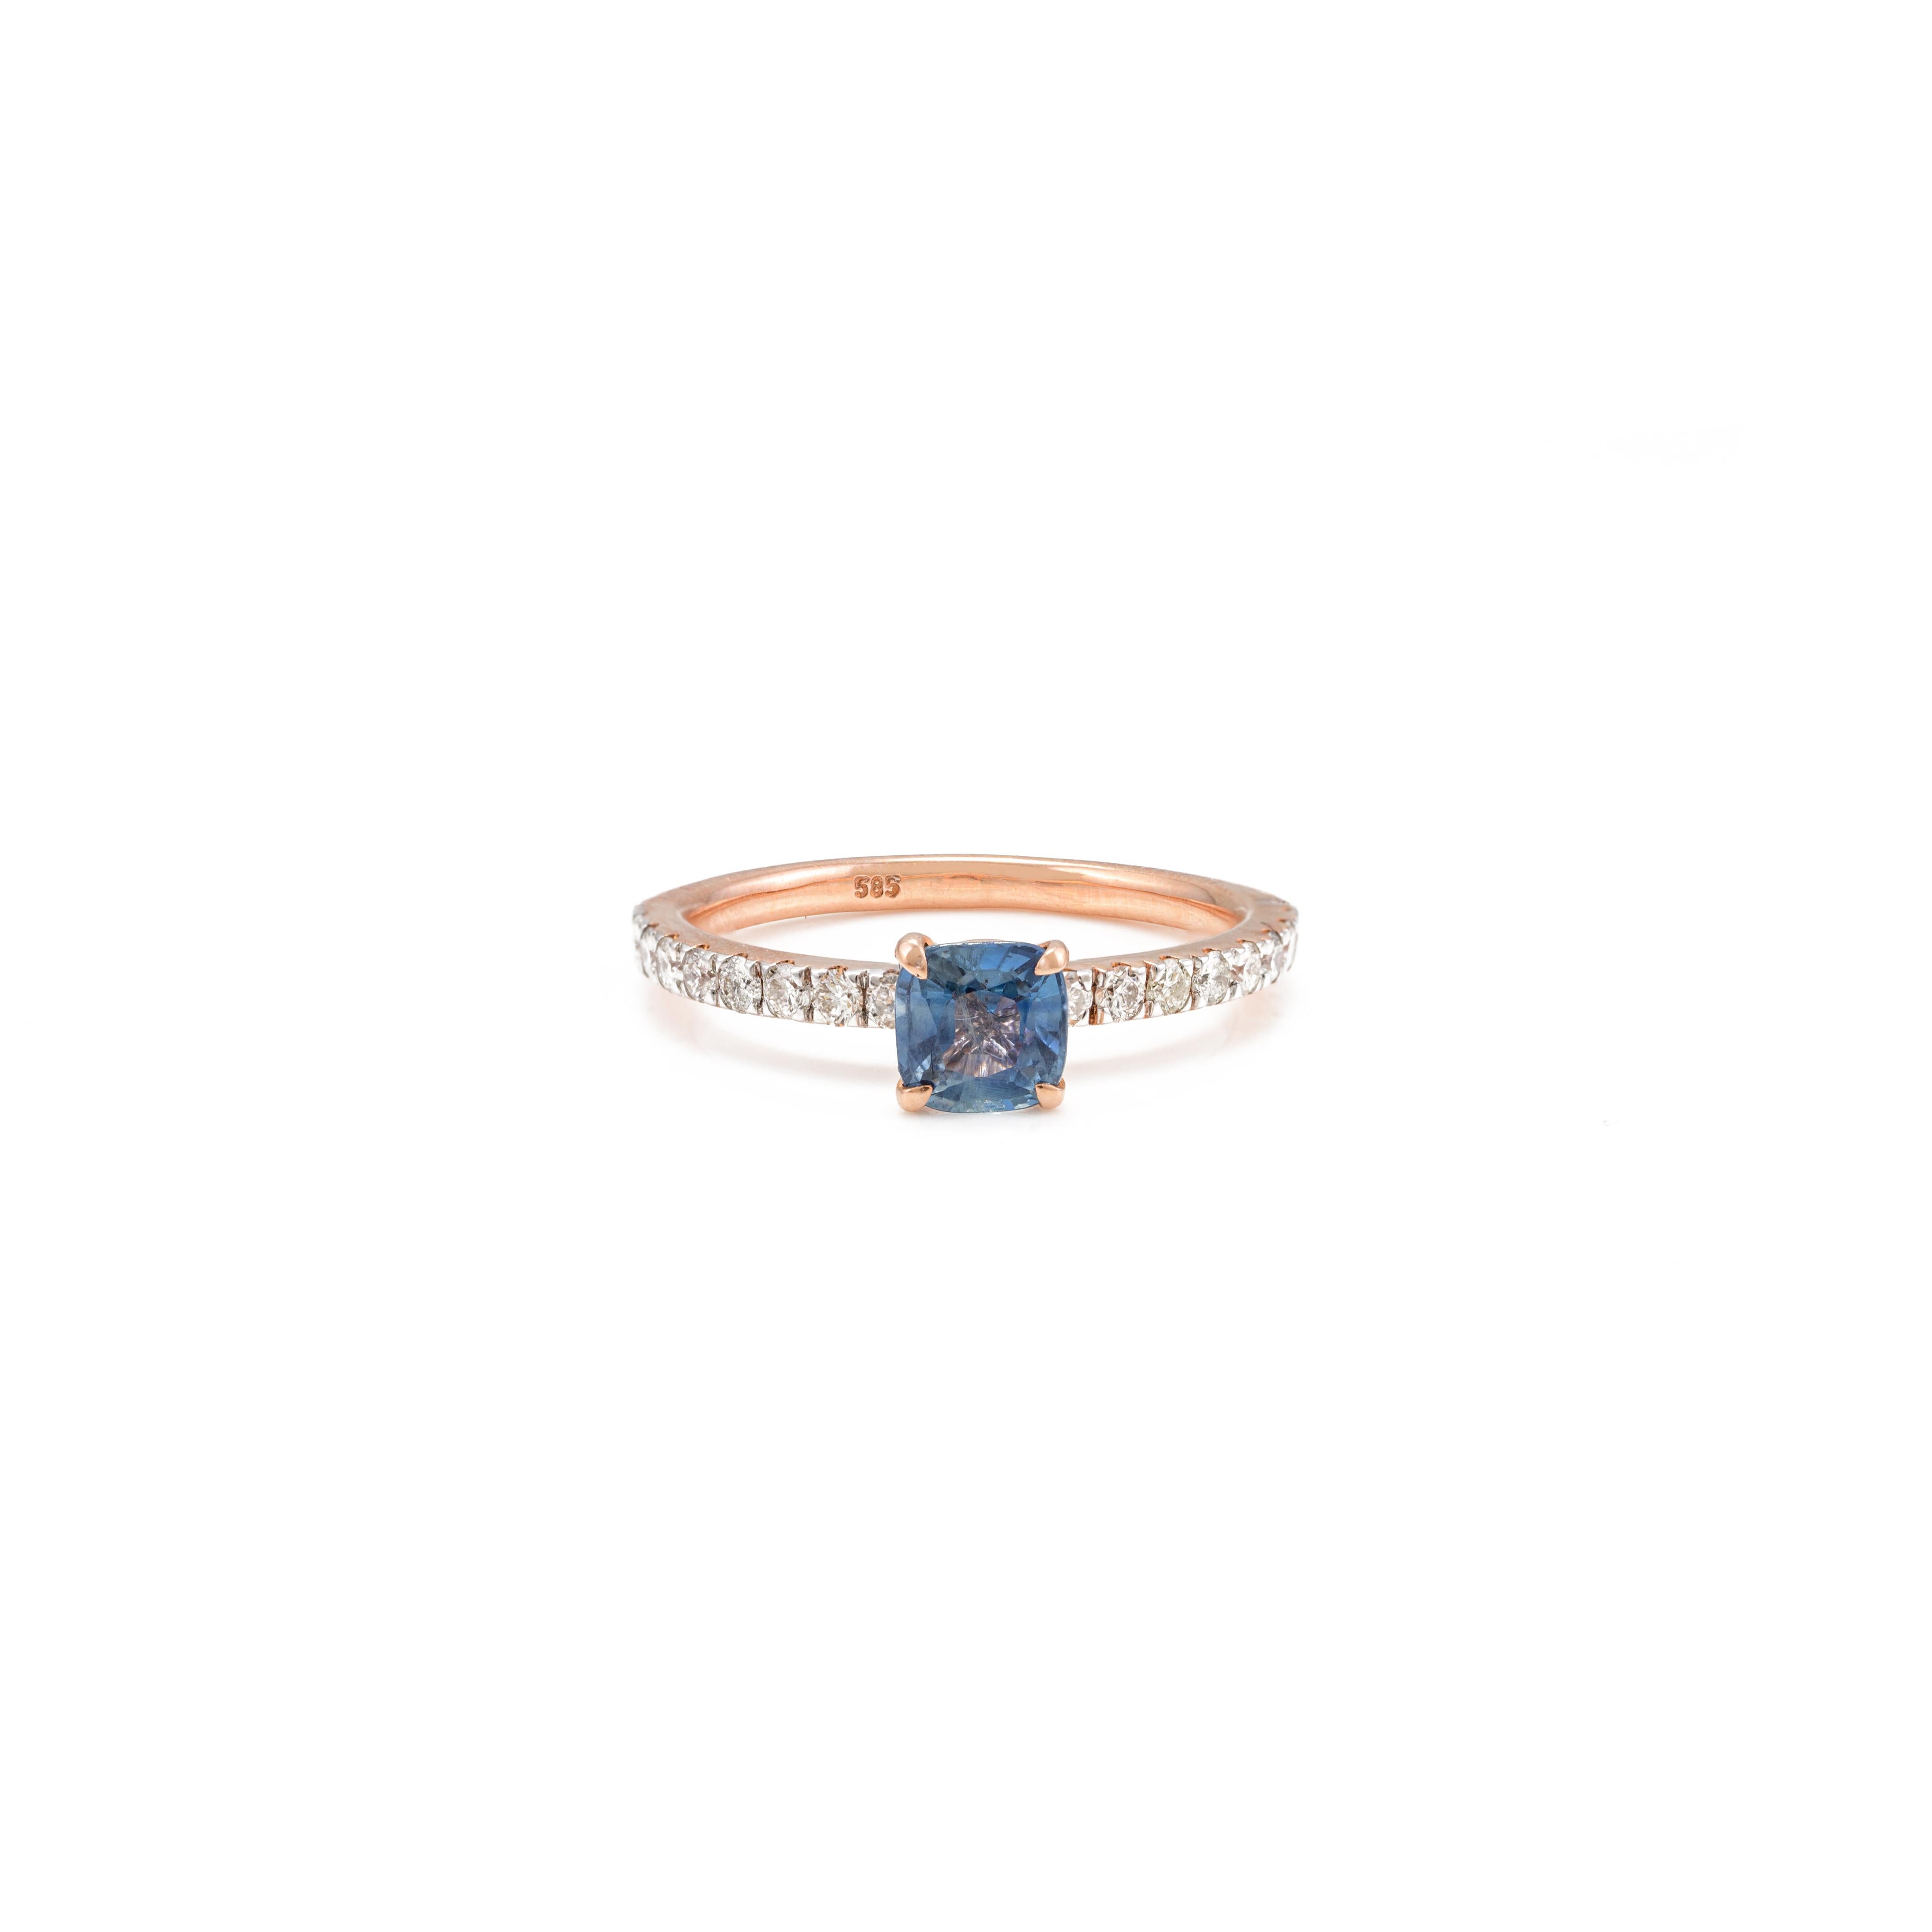 For Sale:  14k Solid Rose Gold Diamond and Cushion Cut Blue Sapphire Ring 4